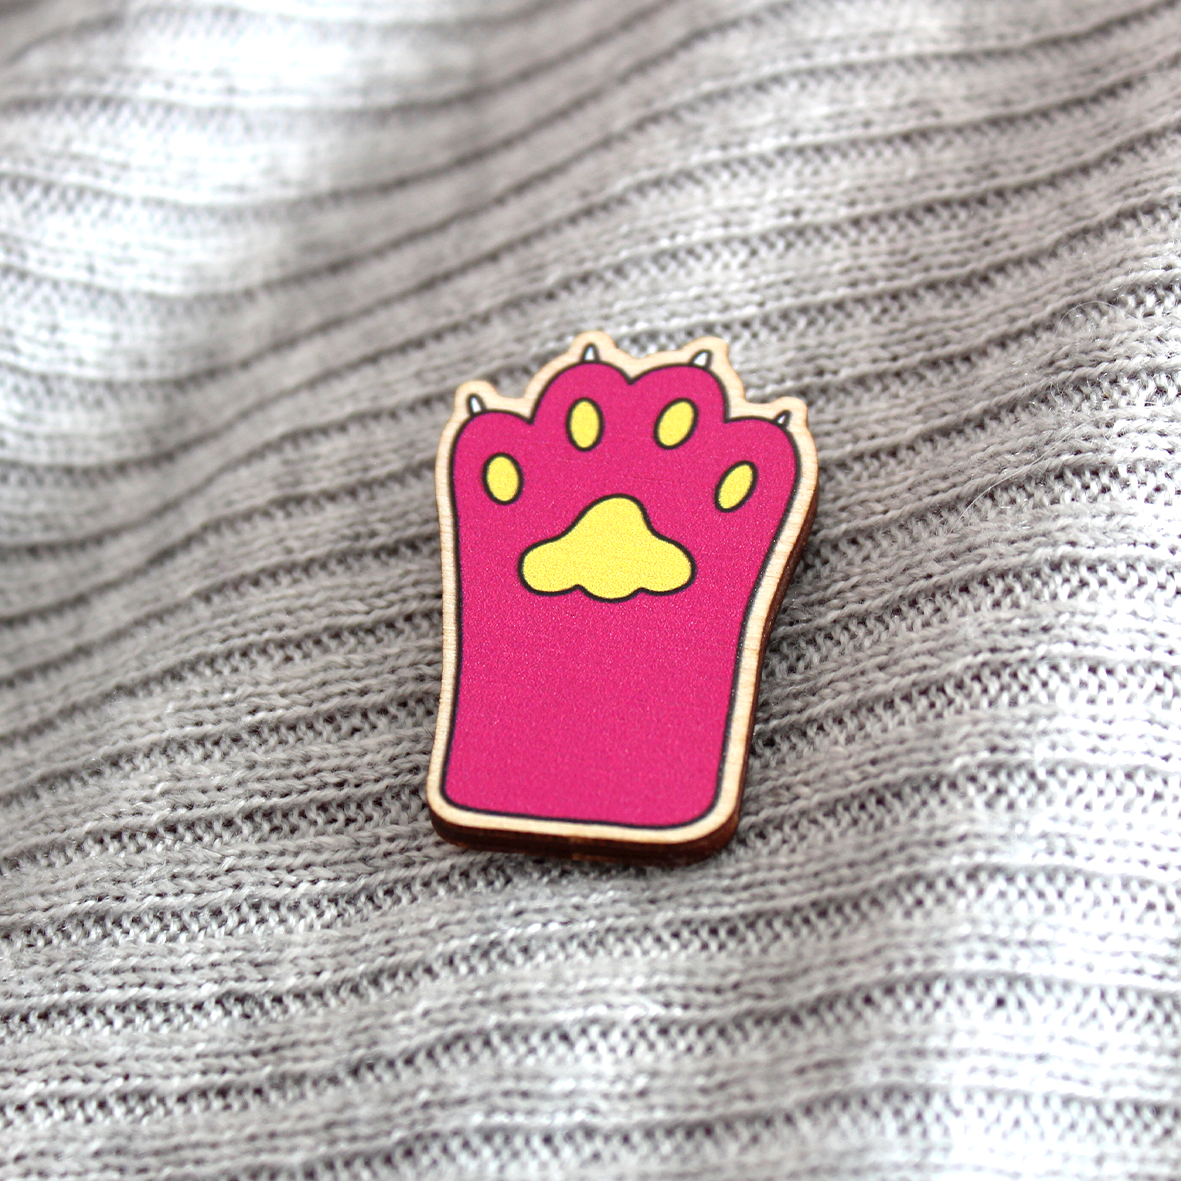 The pink paw in badge is shown on a grey jumper